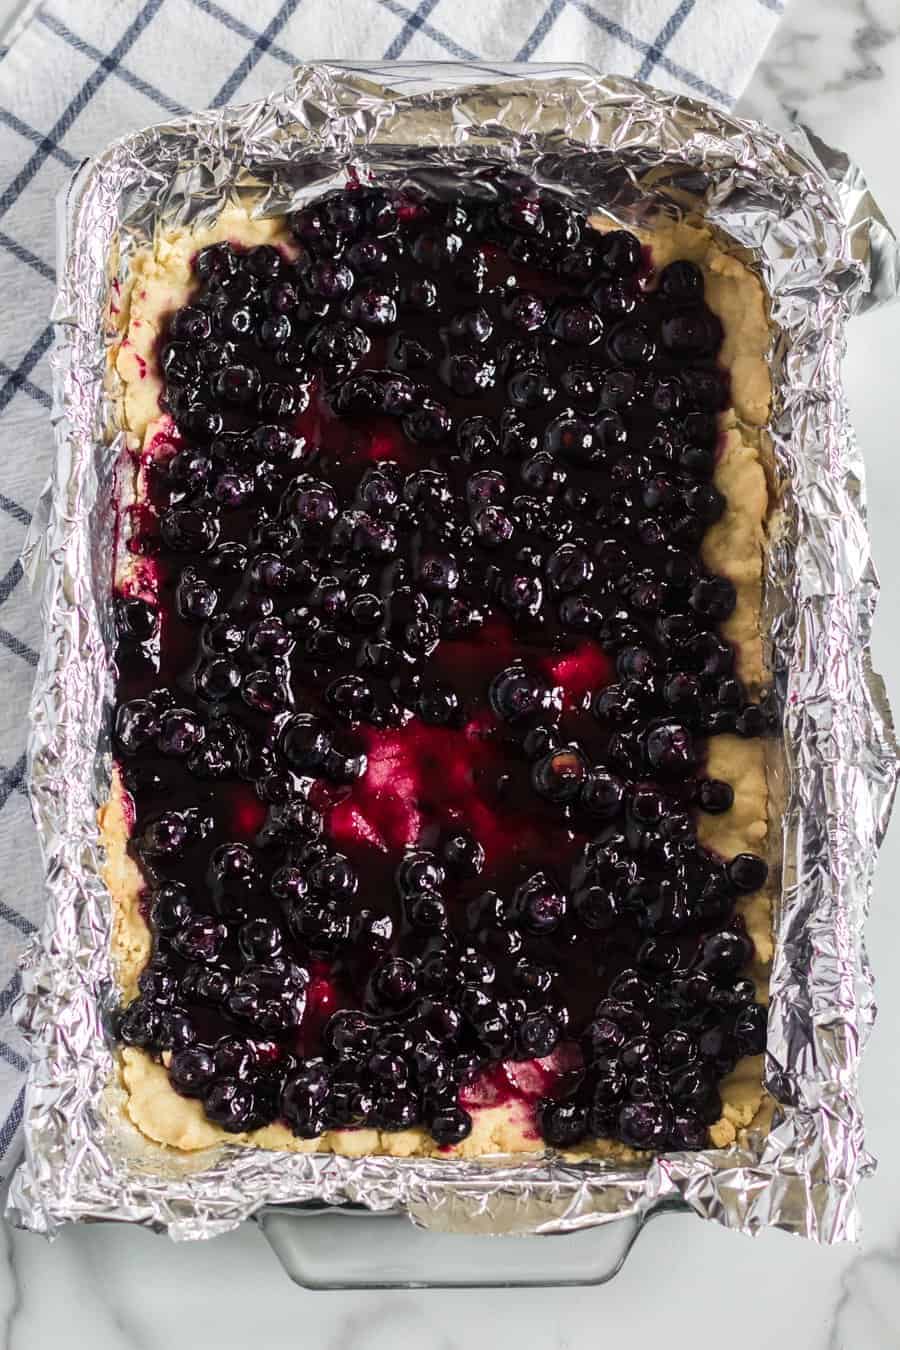 These streusel-topped Blueberry Pie Bars have a dense crust and gooey, blueberry-packed filling to make them a perfect dessert (or breakfast) any day.